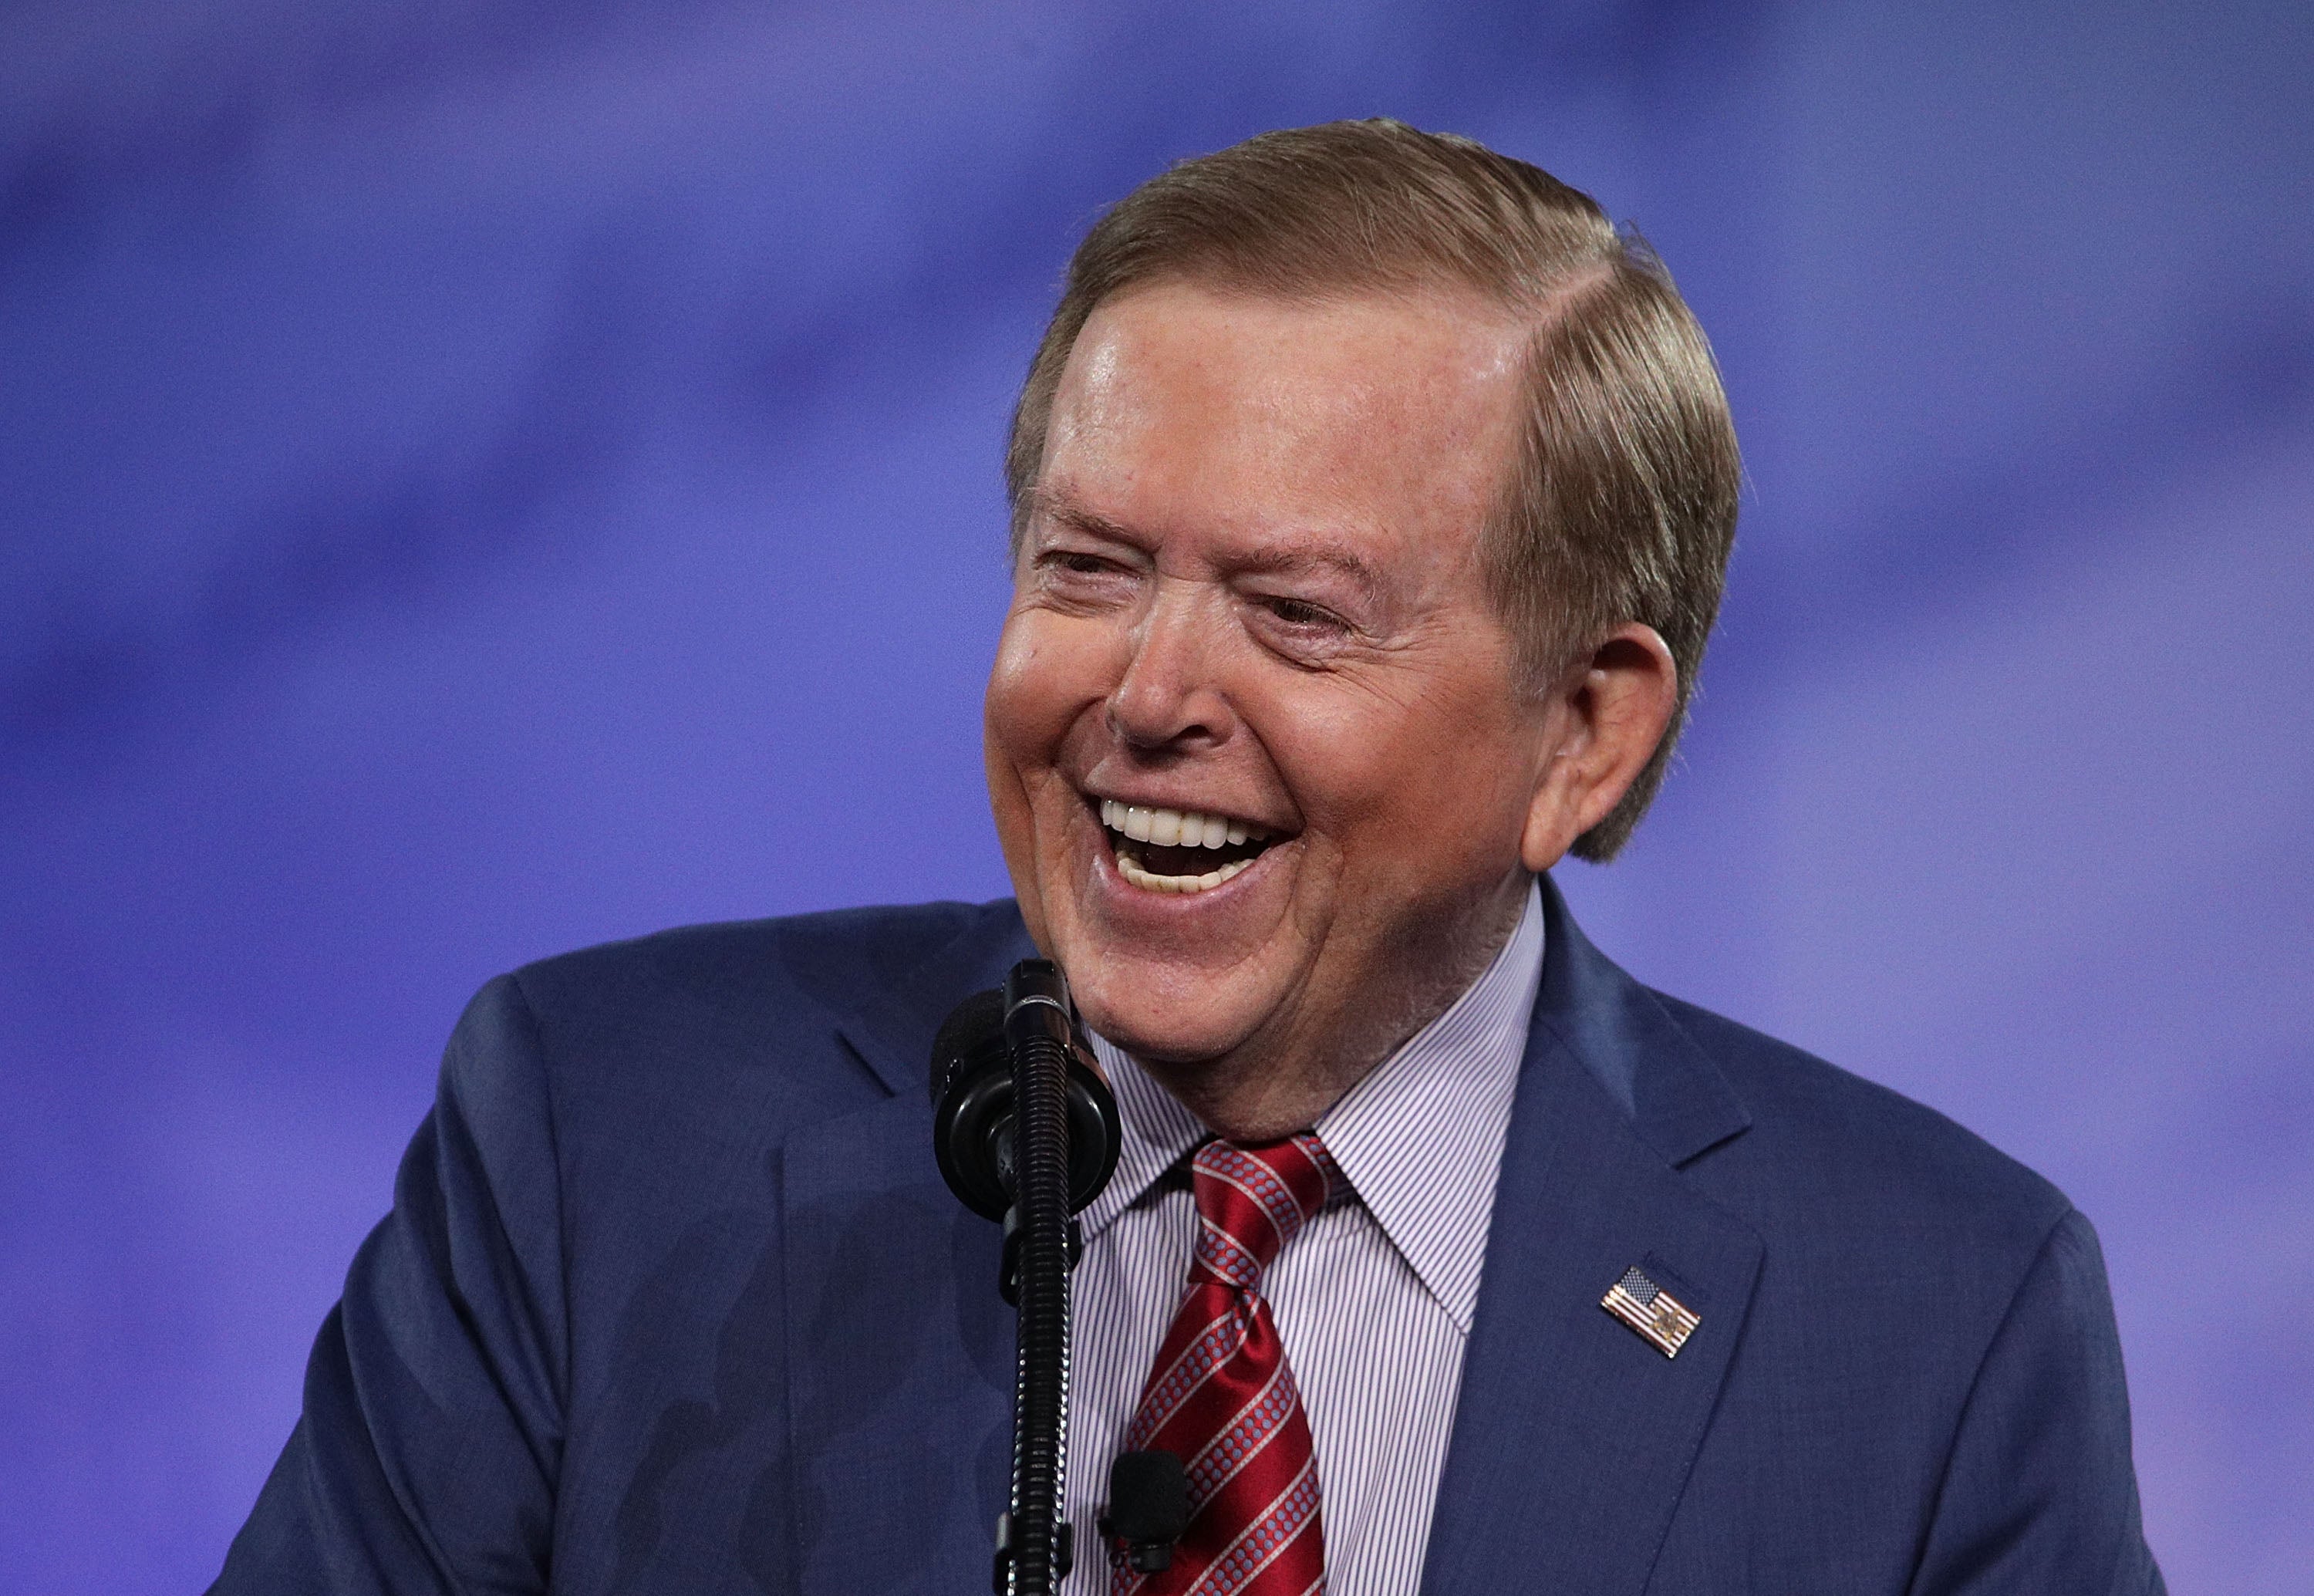 Former Fox News commentator Lou Dobbs during a 2017 CPAC convention. (Photo: Alex Wong, Getty Images)